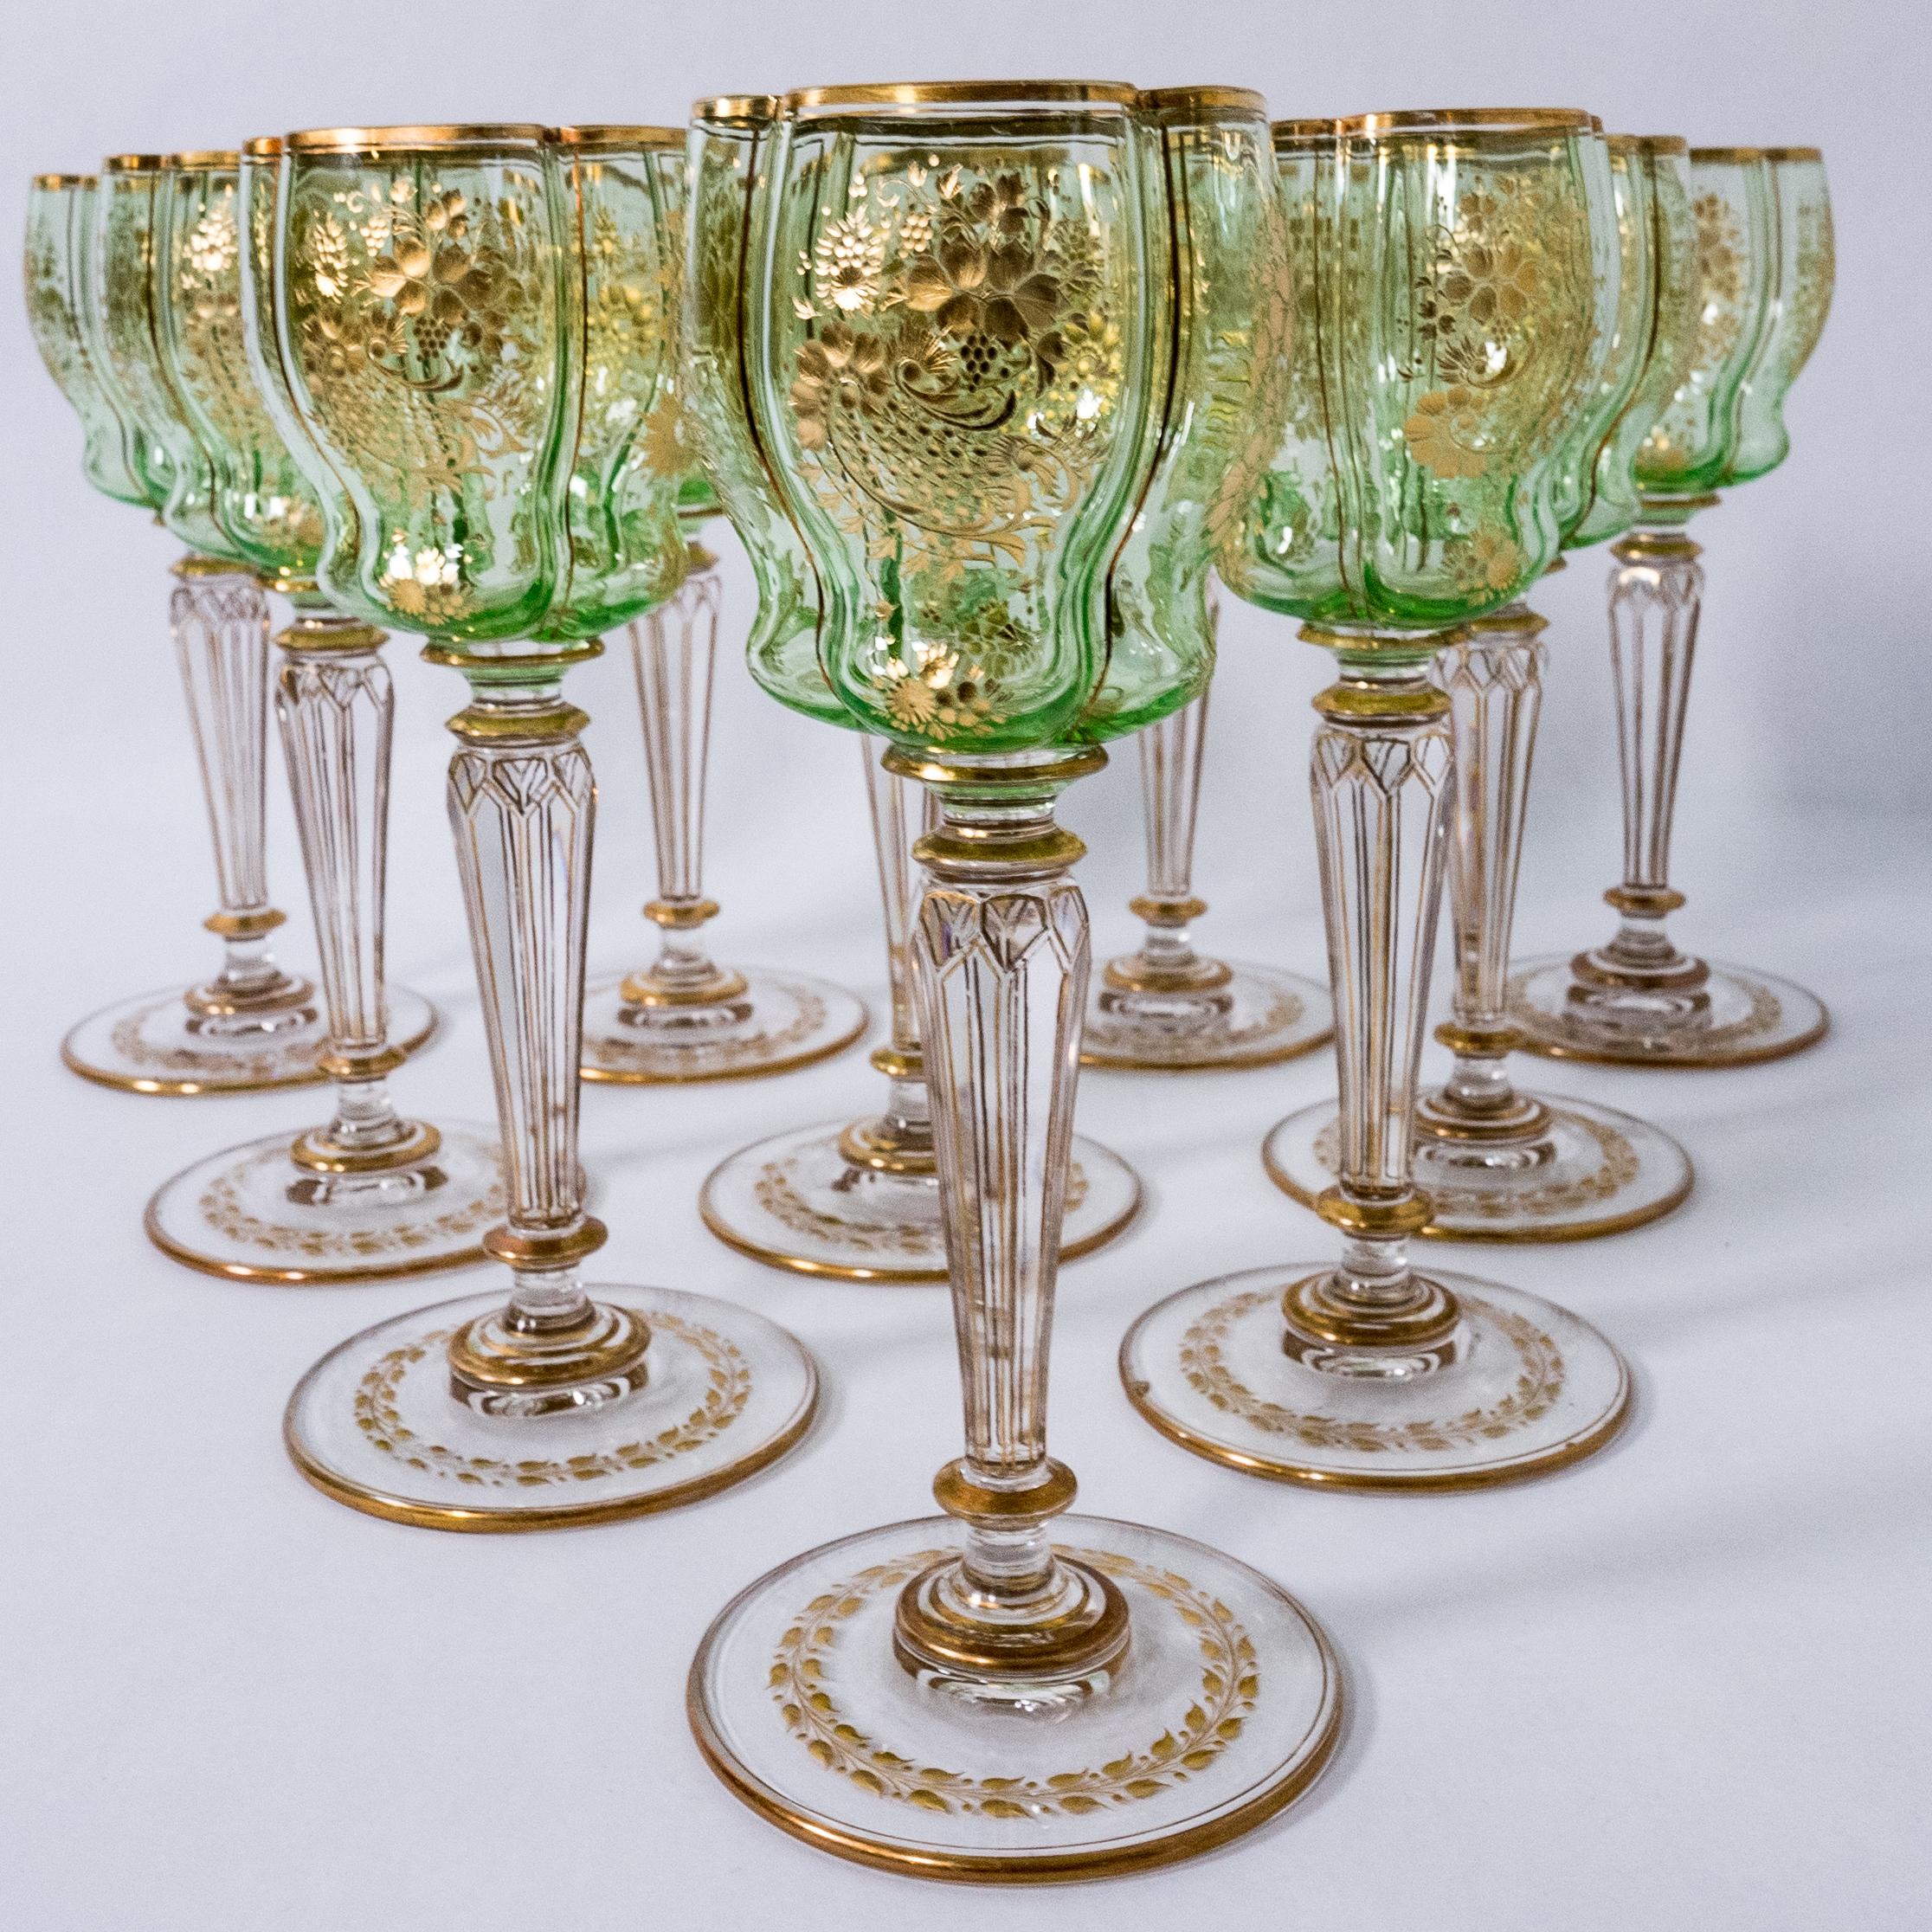 An exquisitely crafted set of white wine glasses by the storied Gilded Age firm of Moser. This group of 10 has an unique quatre foil shaped top with a triple stepped stem and fully wheel cut bowl and base. The shade of green and the gilding remain